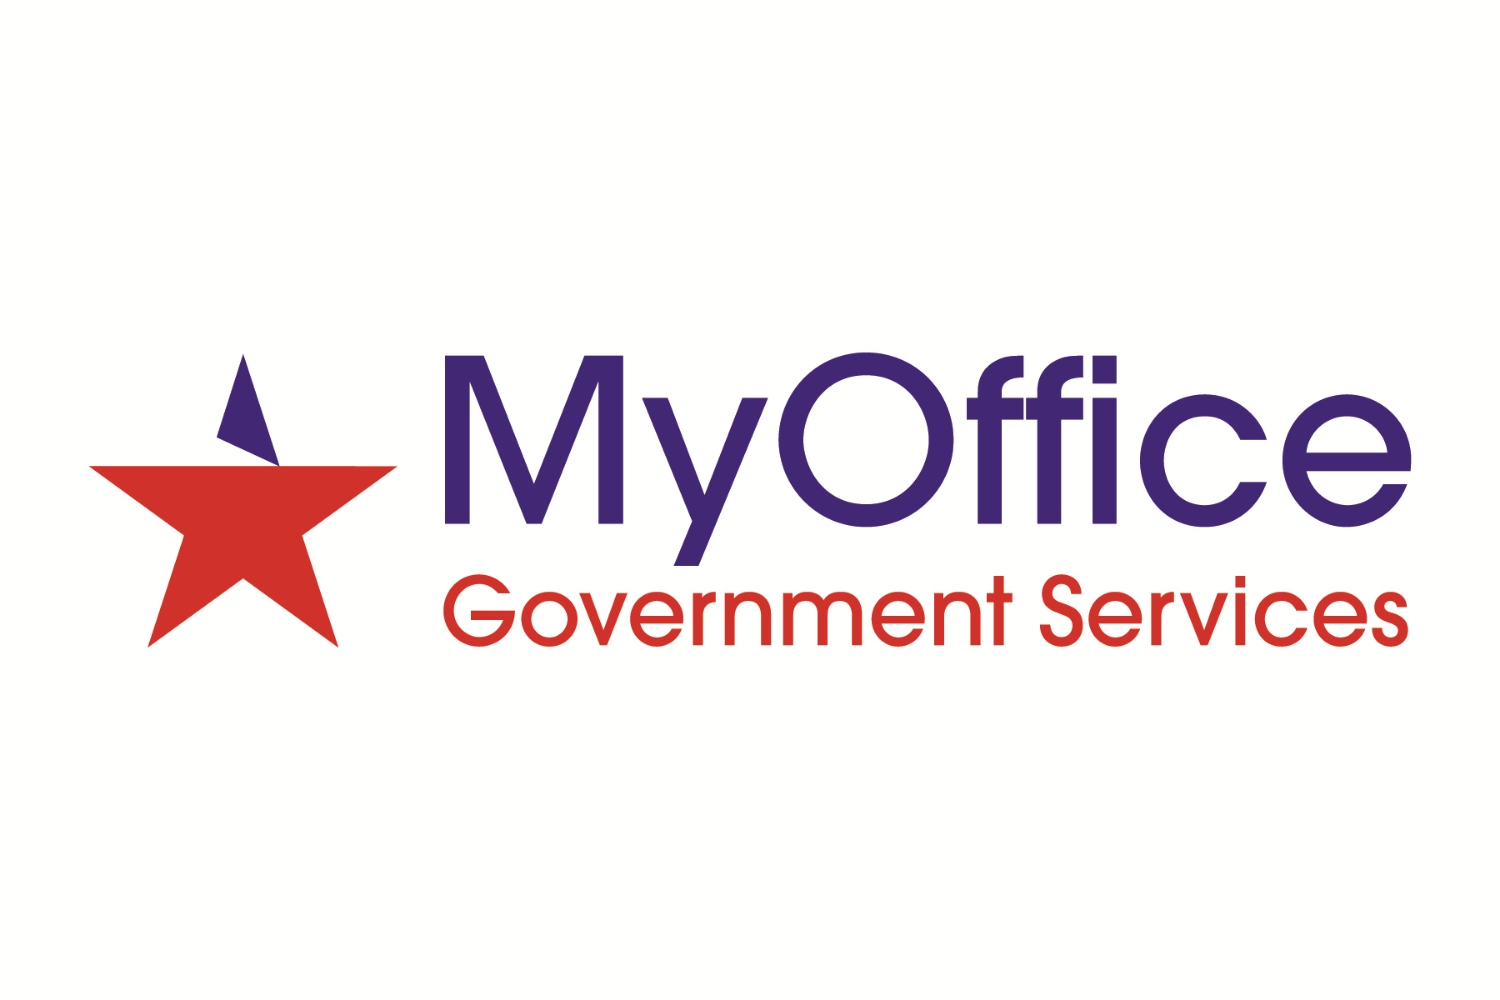 MyOffice Government Services